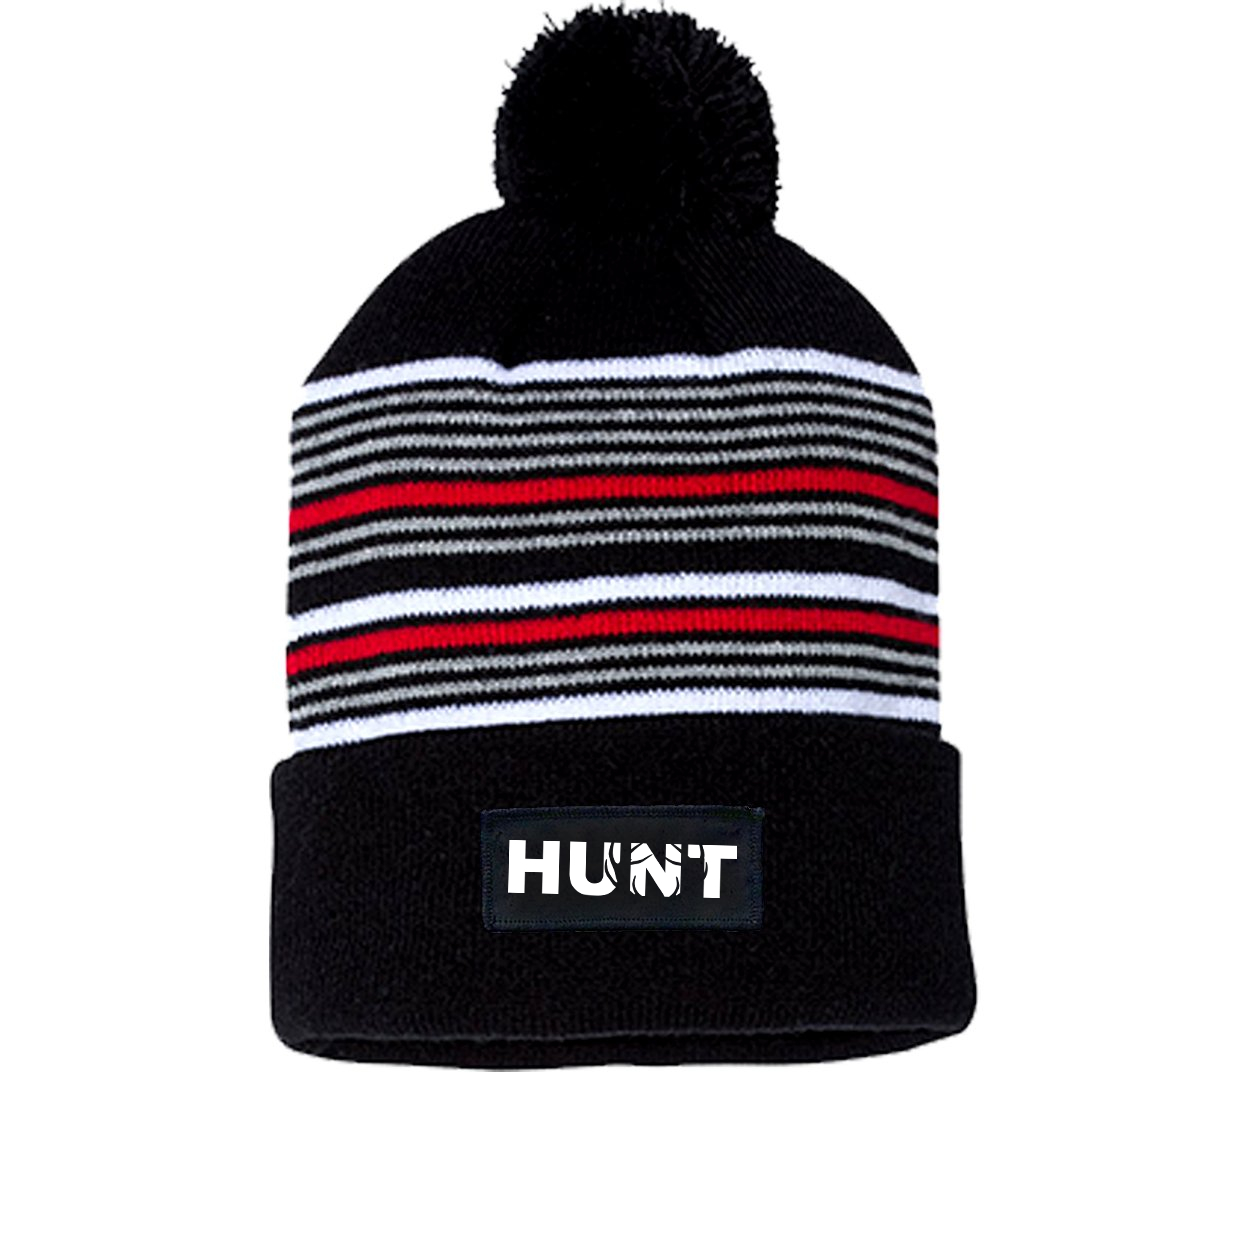 Hunt Rack Logo Night Out Woven Patch Roll Up Pom Knit Beanie Black/ White/ Grey/ Red Beanie (White Logo)